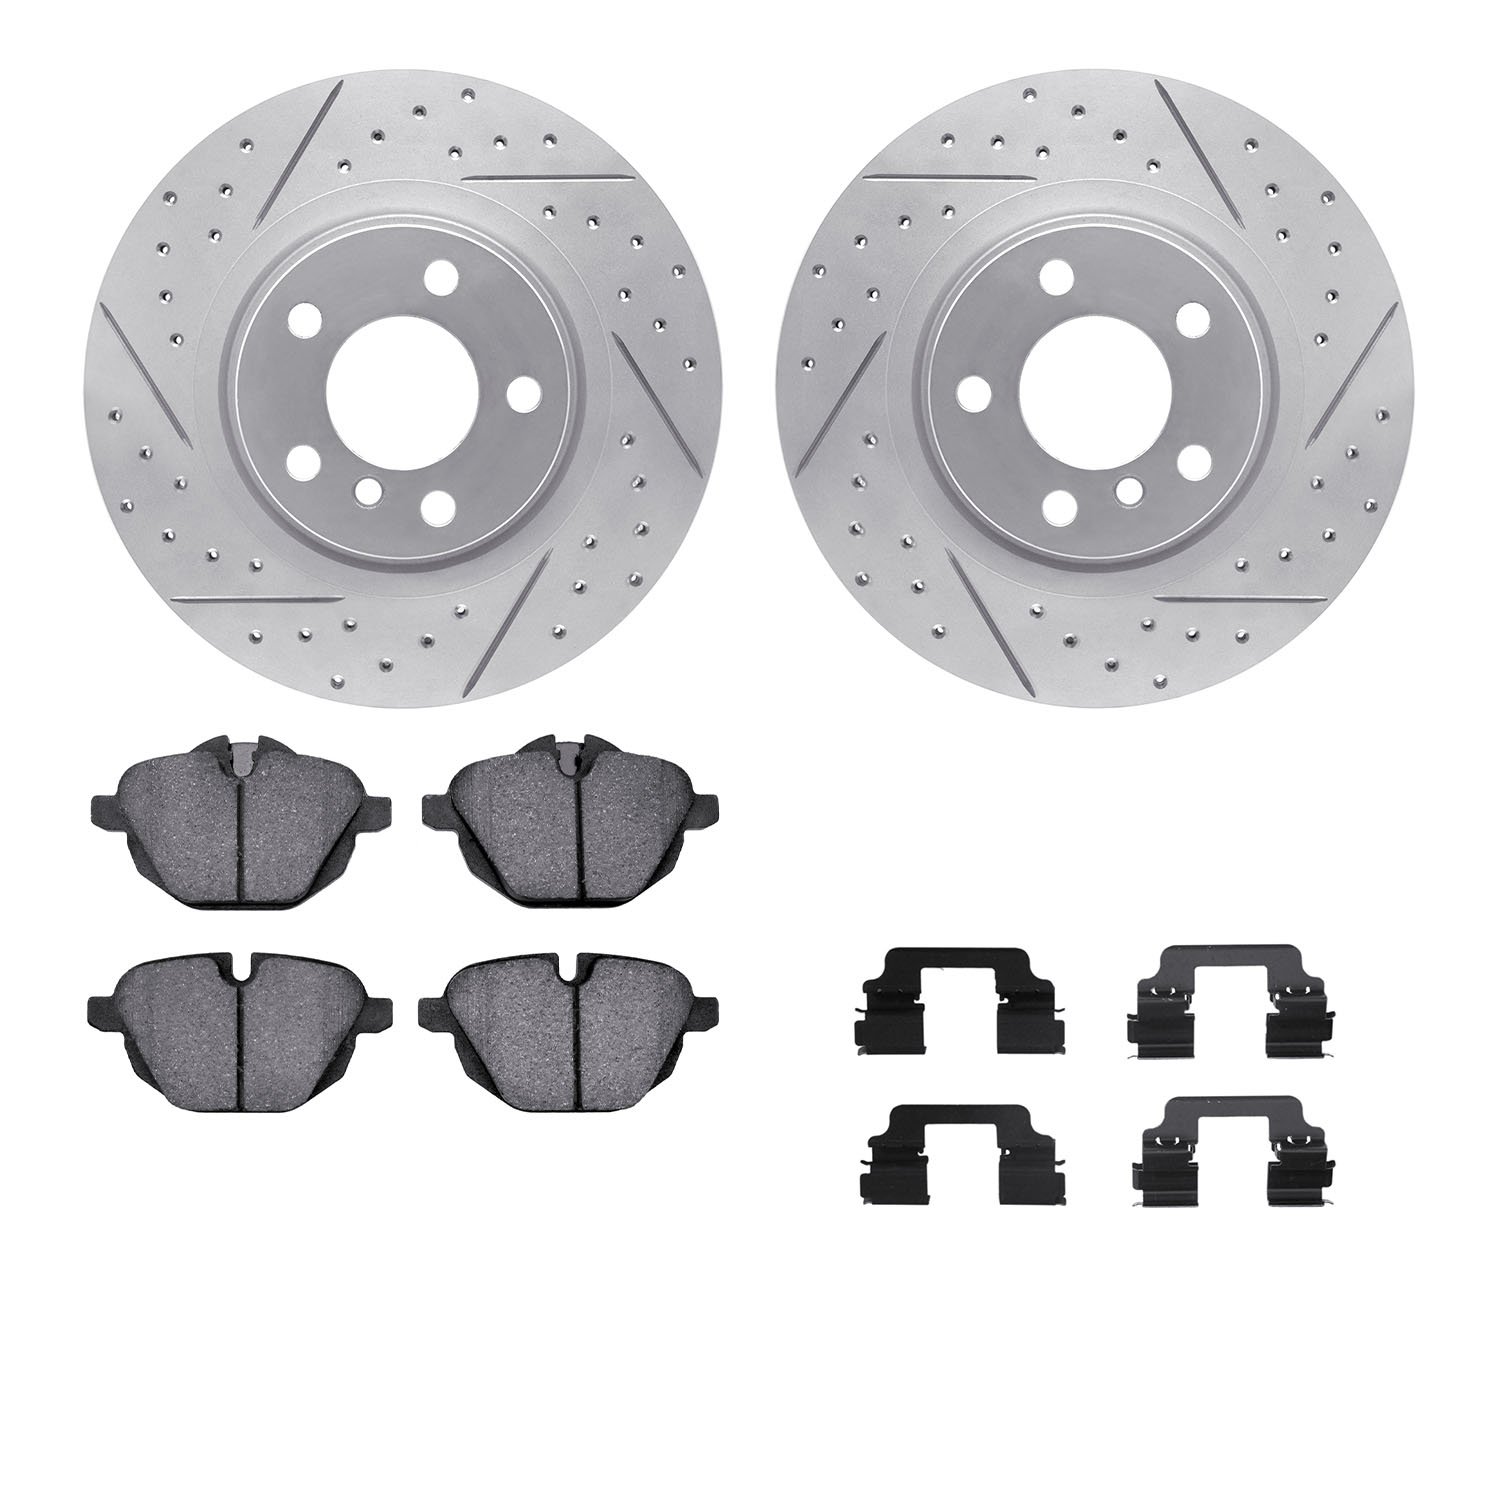 2512-31117 Geoperformance Drilled/Slotted Rotors w/5000 Advanced Brake Pads Kit & Hardware, 2011-2018 BMW, Position: Rear